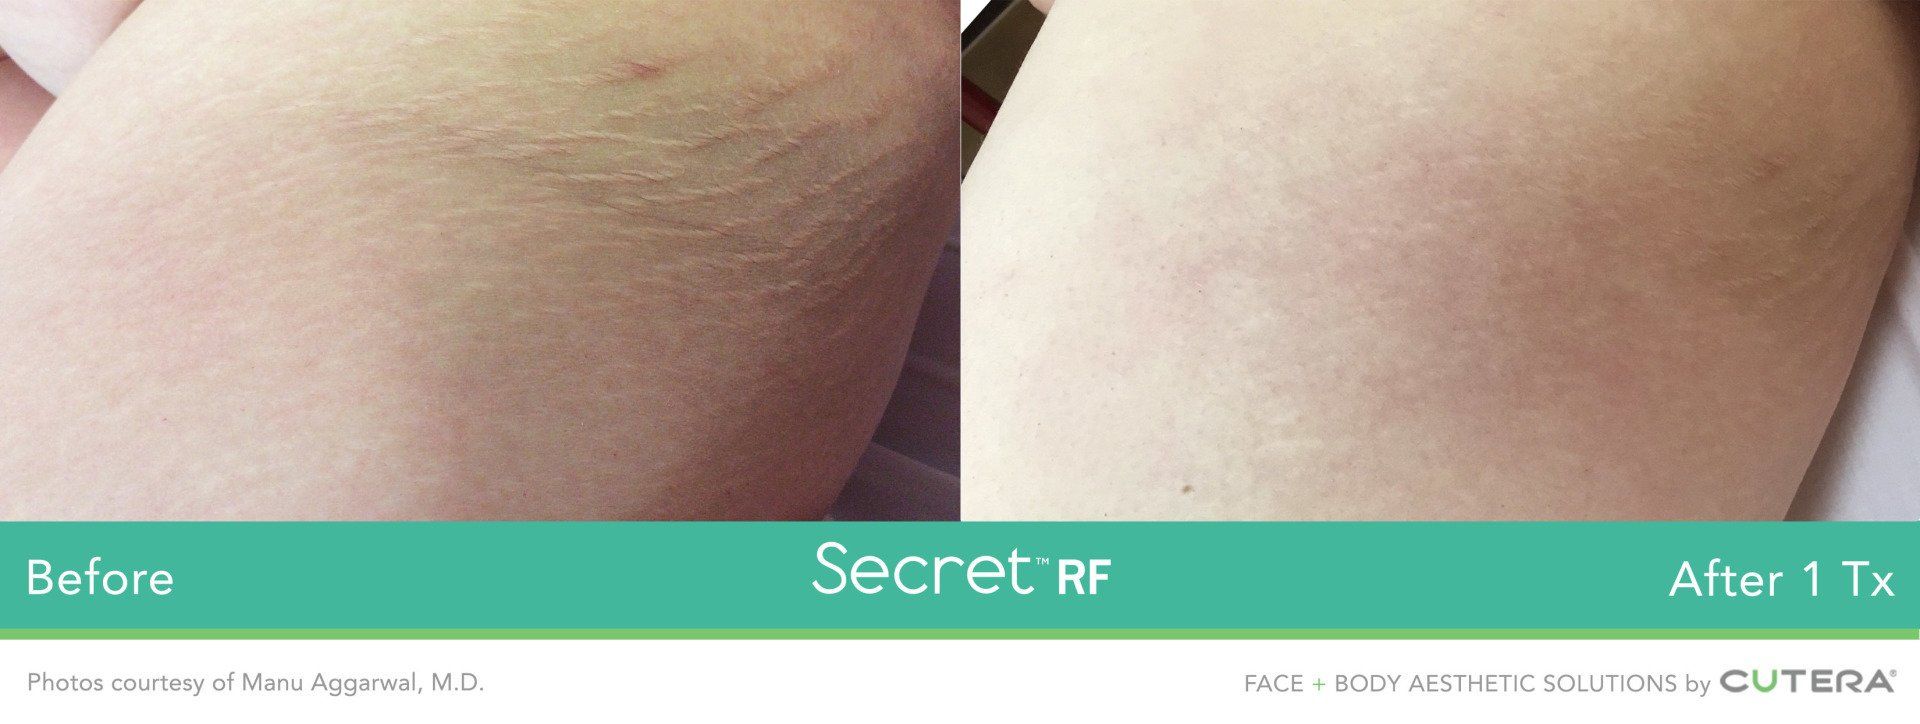 Photo of a person 's leg before and after Secret RF